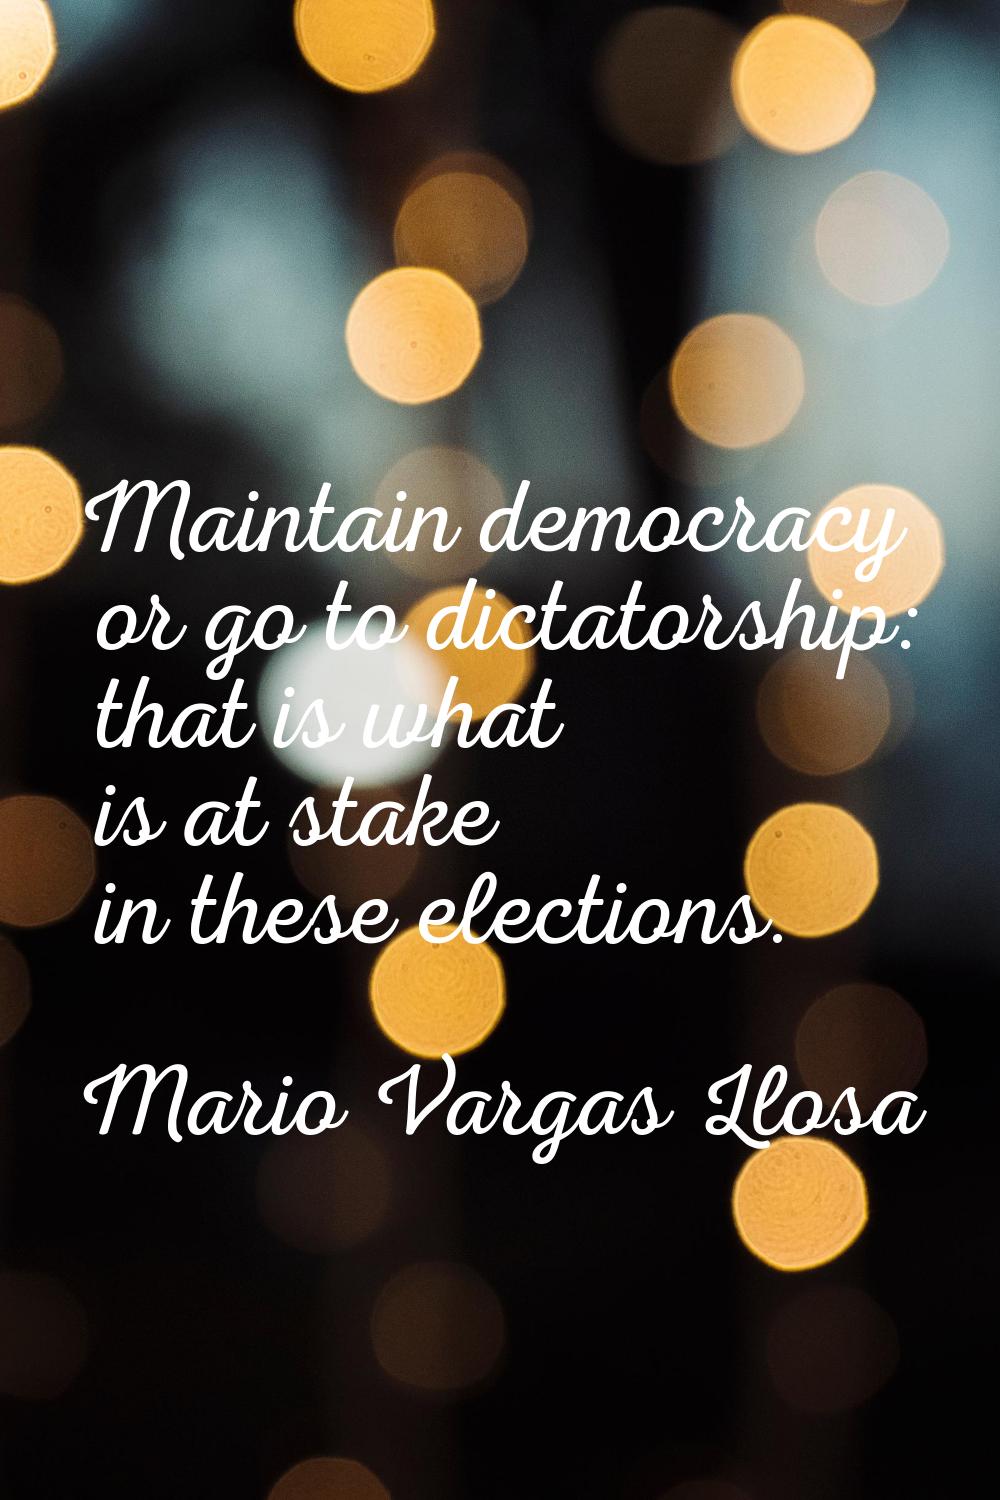 Maintain democracy or go to dictatorship: that is what is at stake in these elections.